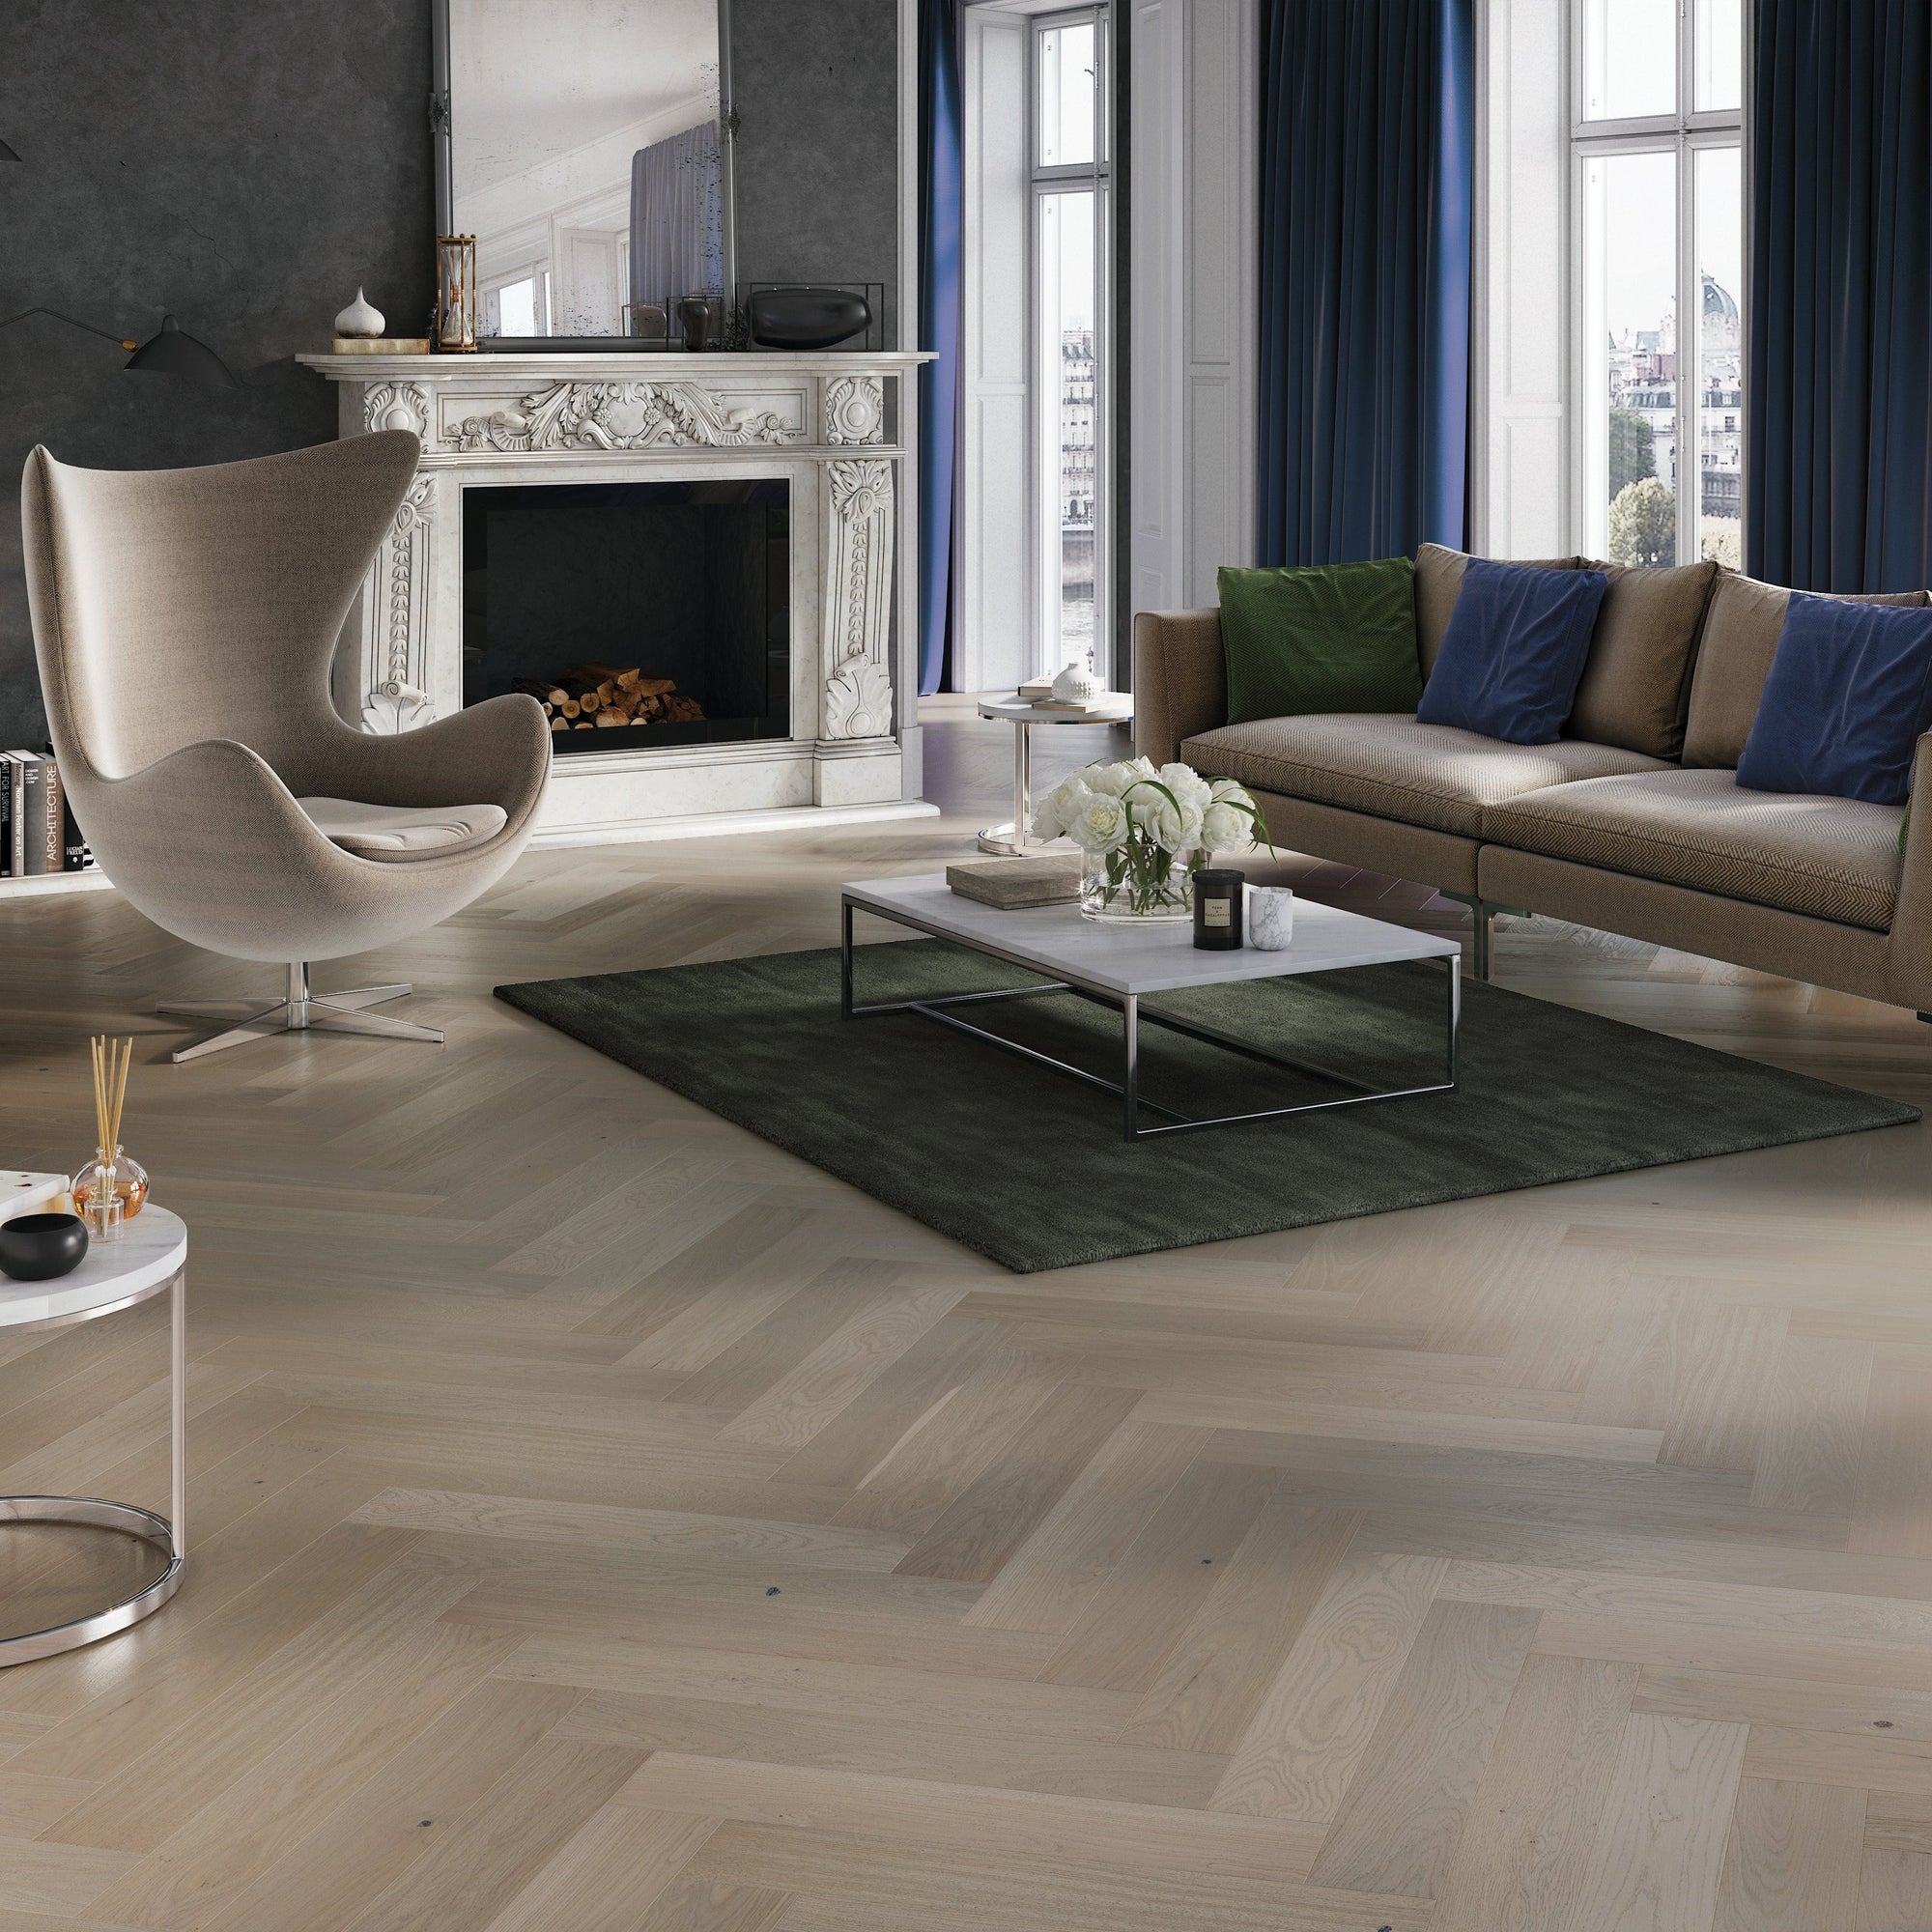 Free Sample of Ashton & Rose Gillow engineered hardwood floor from our Herringbone collection